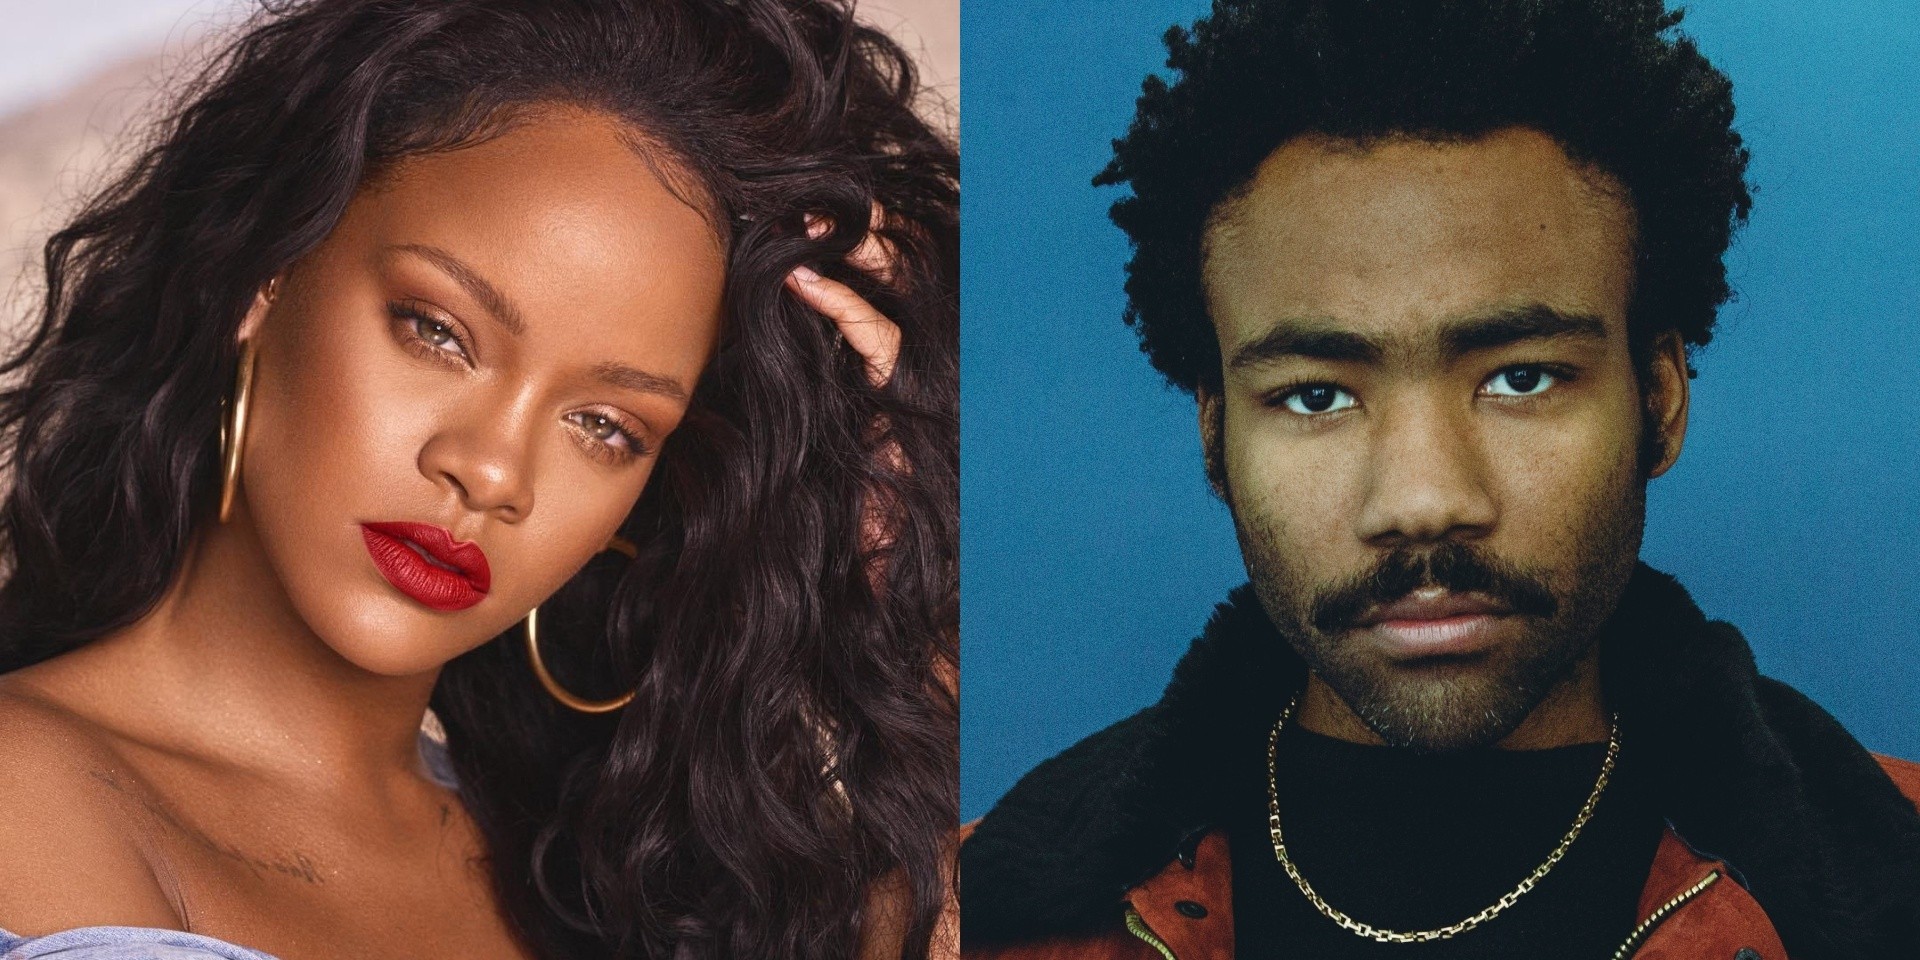 Rihanna and Donald Glover to star in new movie, Guava Island